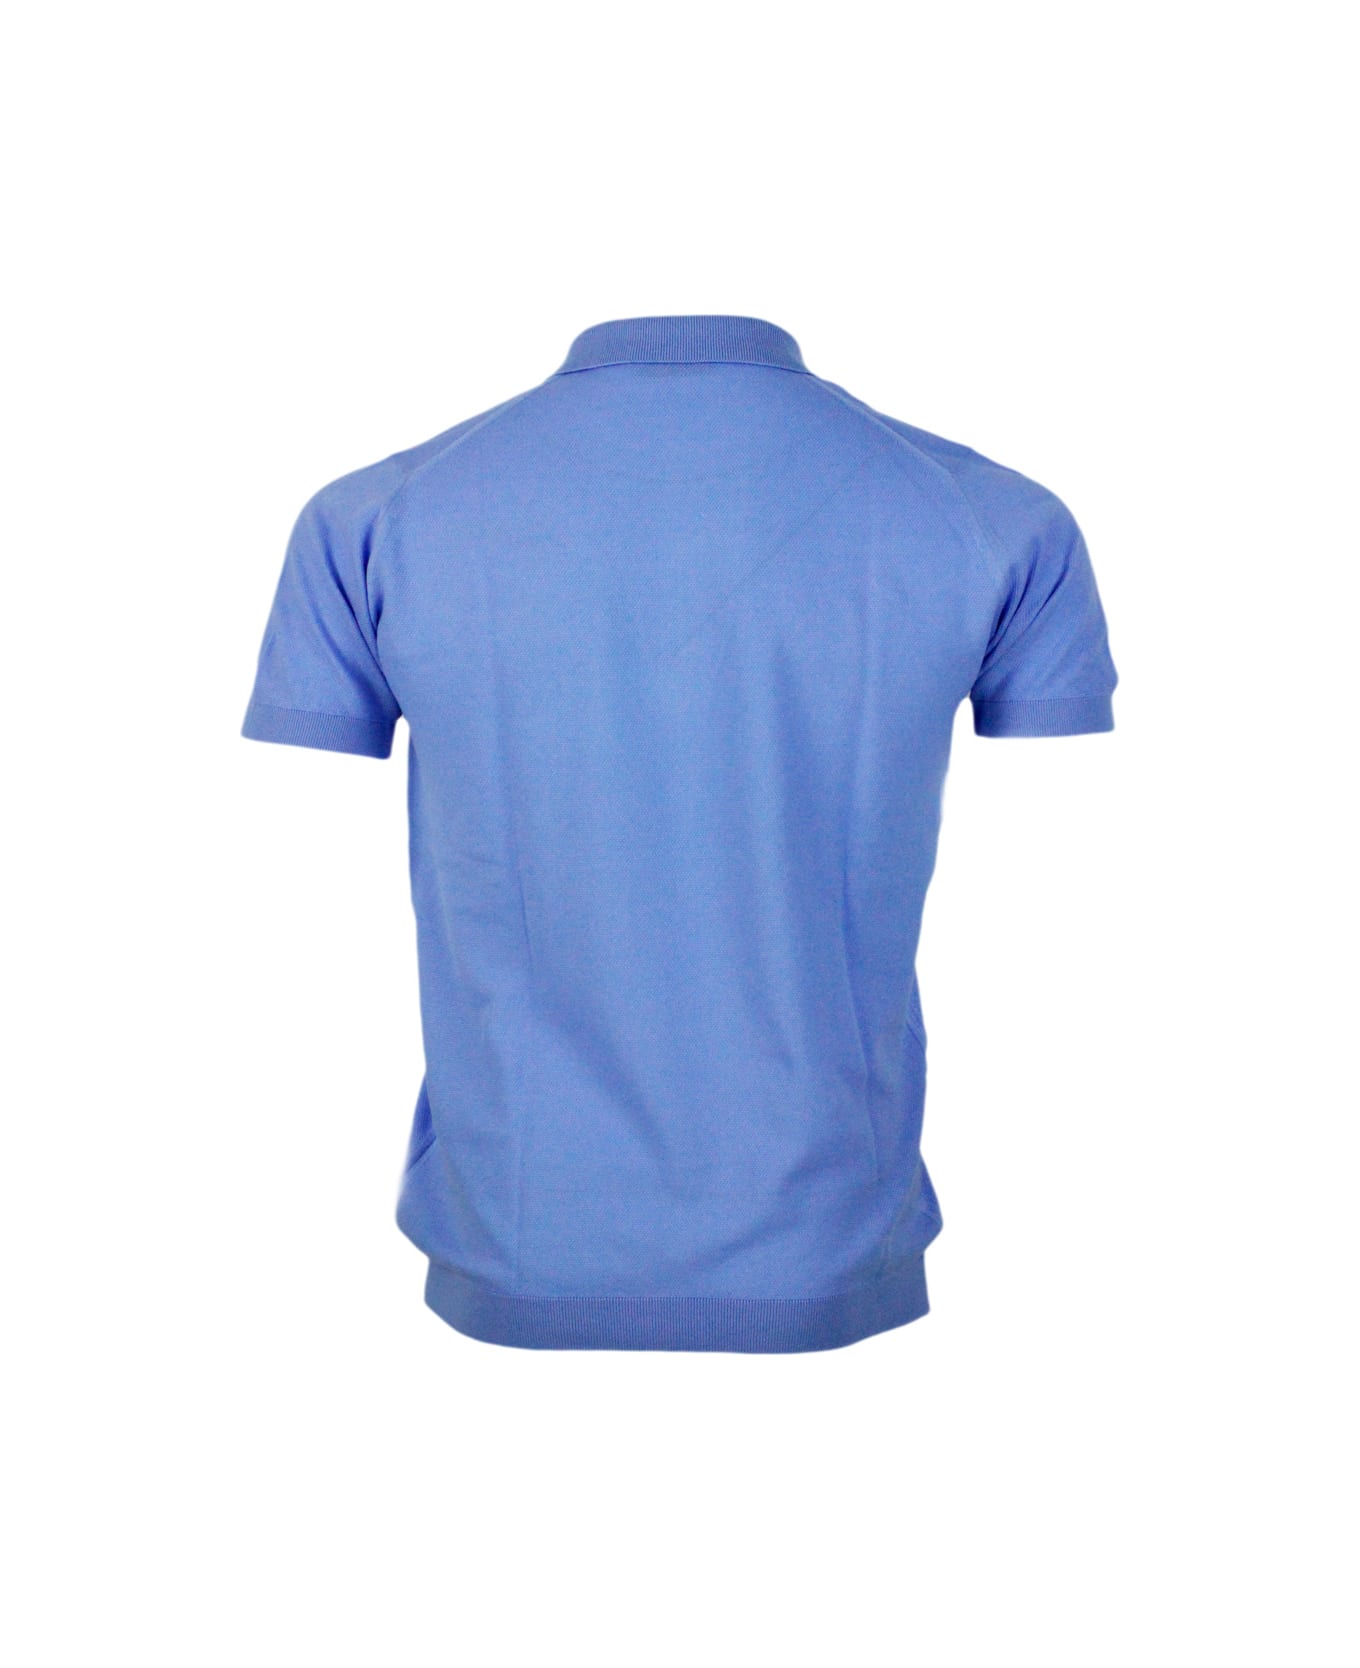 John Smedley Short-sleeved Polo Shirt In Extrafine Piqué Cotton Thread With Three Buttons - Blu ポロシャツ